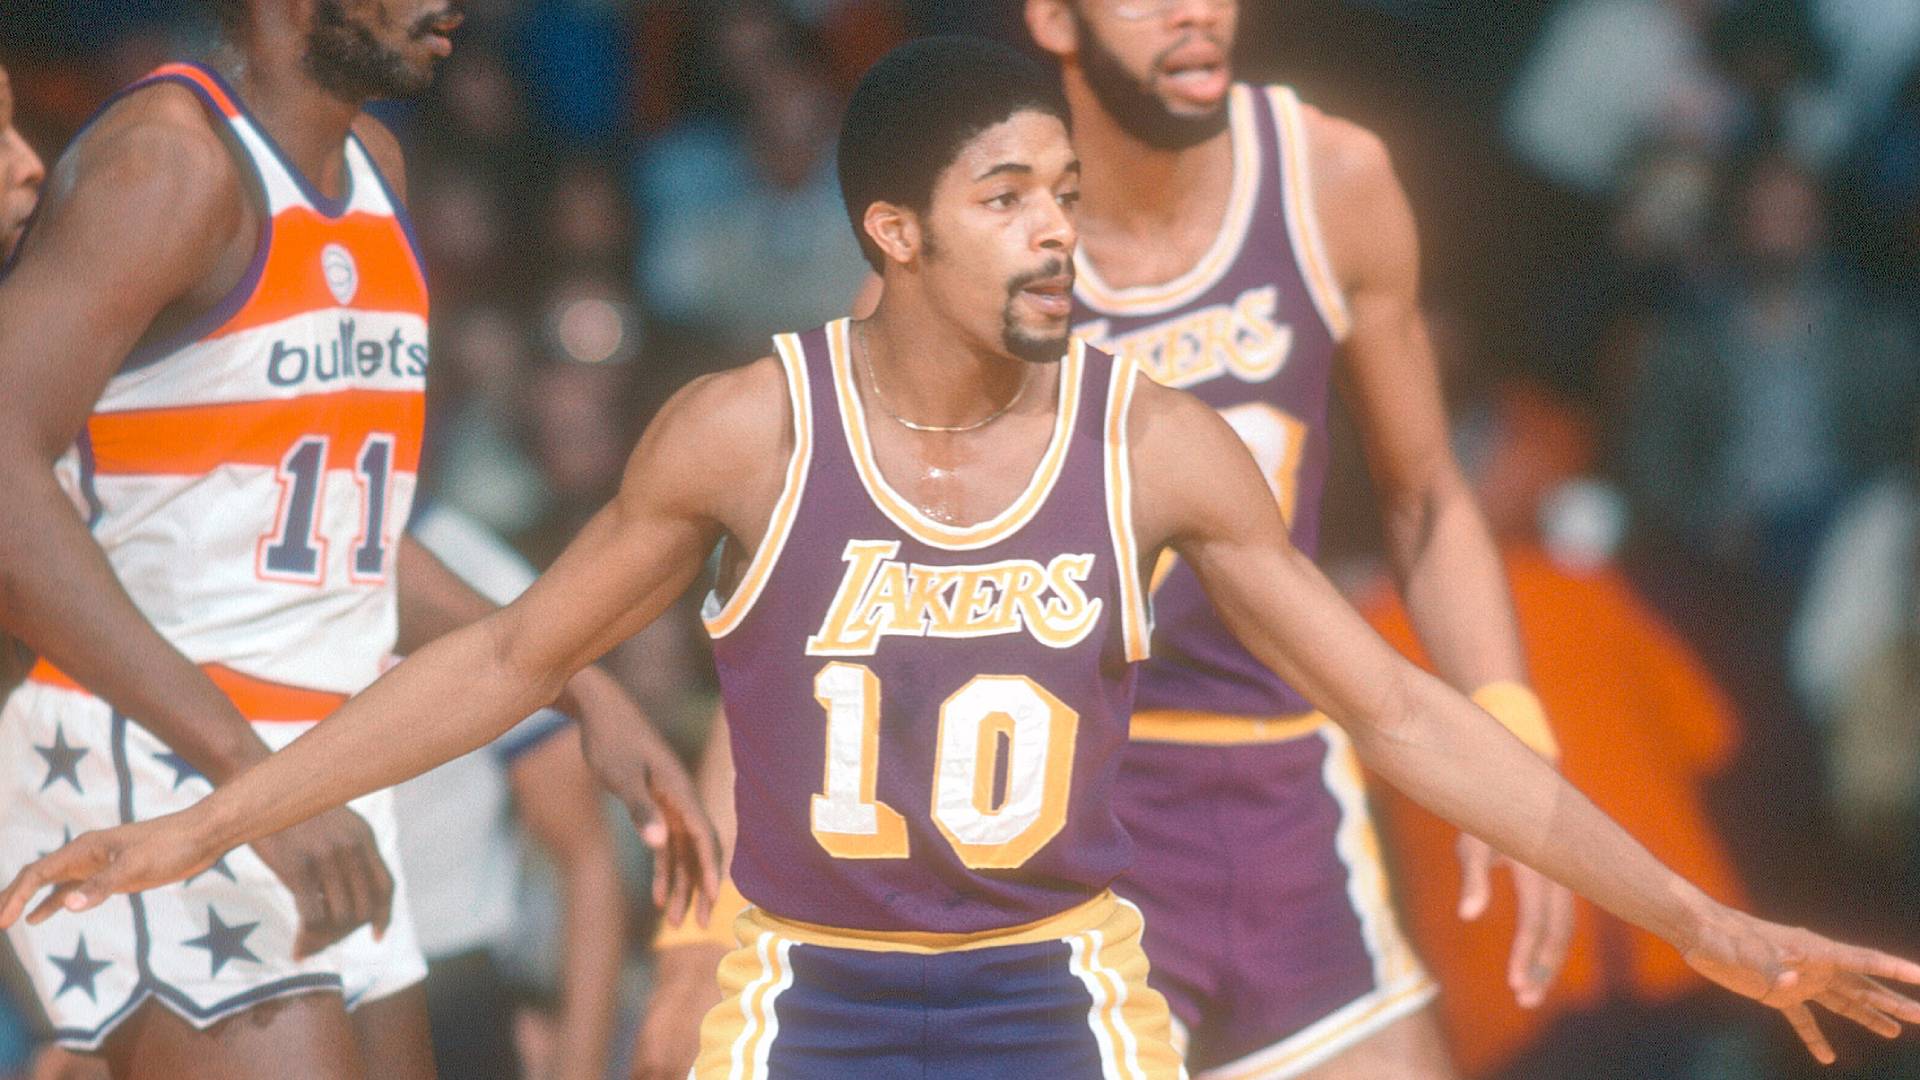 NORM NIXON REACTS! Son Playing Him on WINNING TIME HBO Series